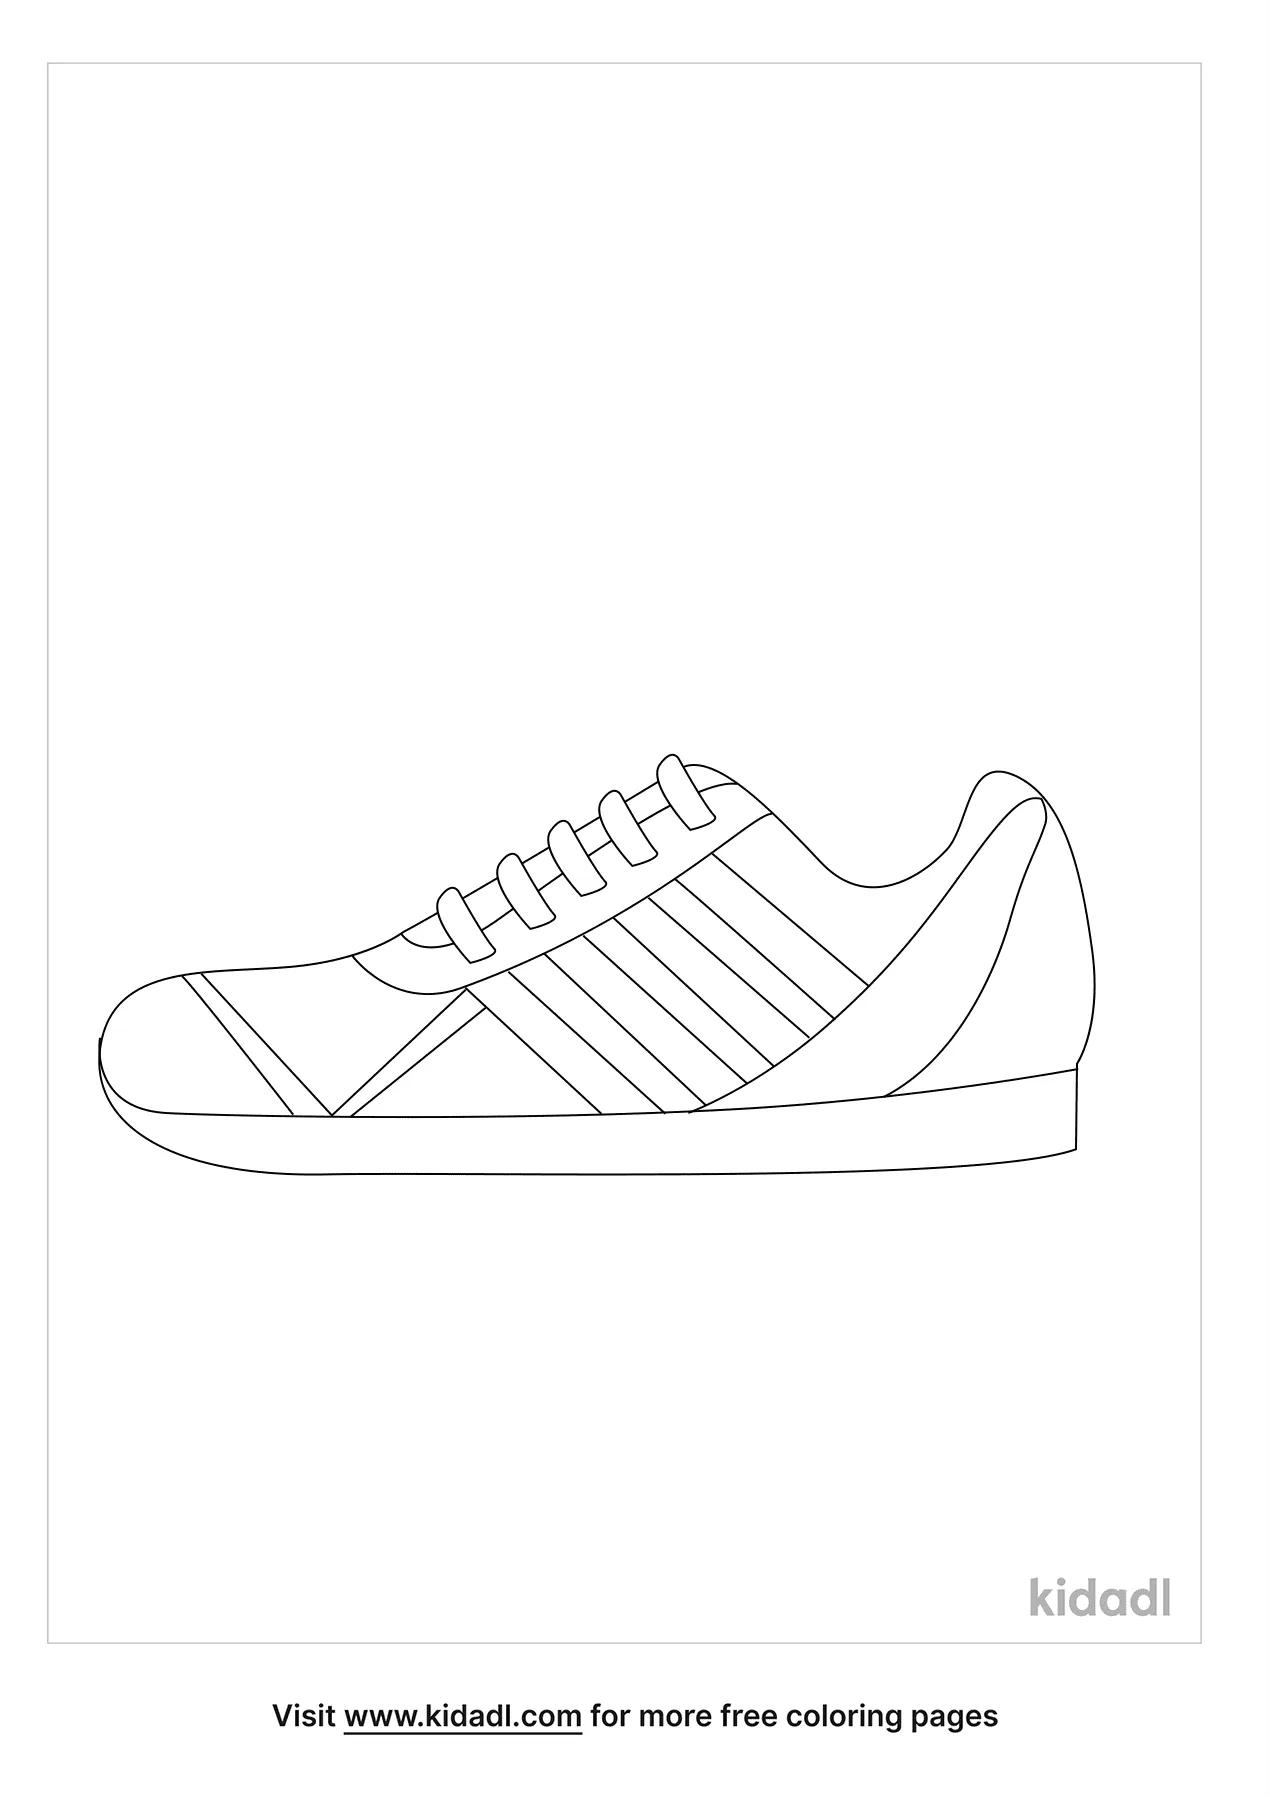 Athletic Kids Shoes Coloring Page | Free Fashion Coloring Page | Kidadl